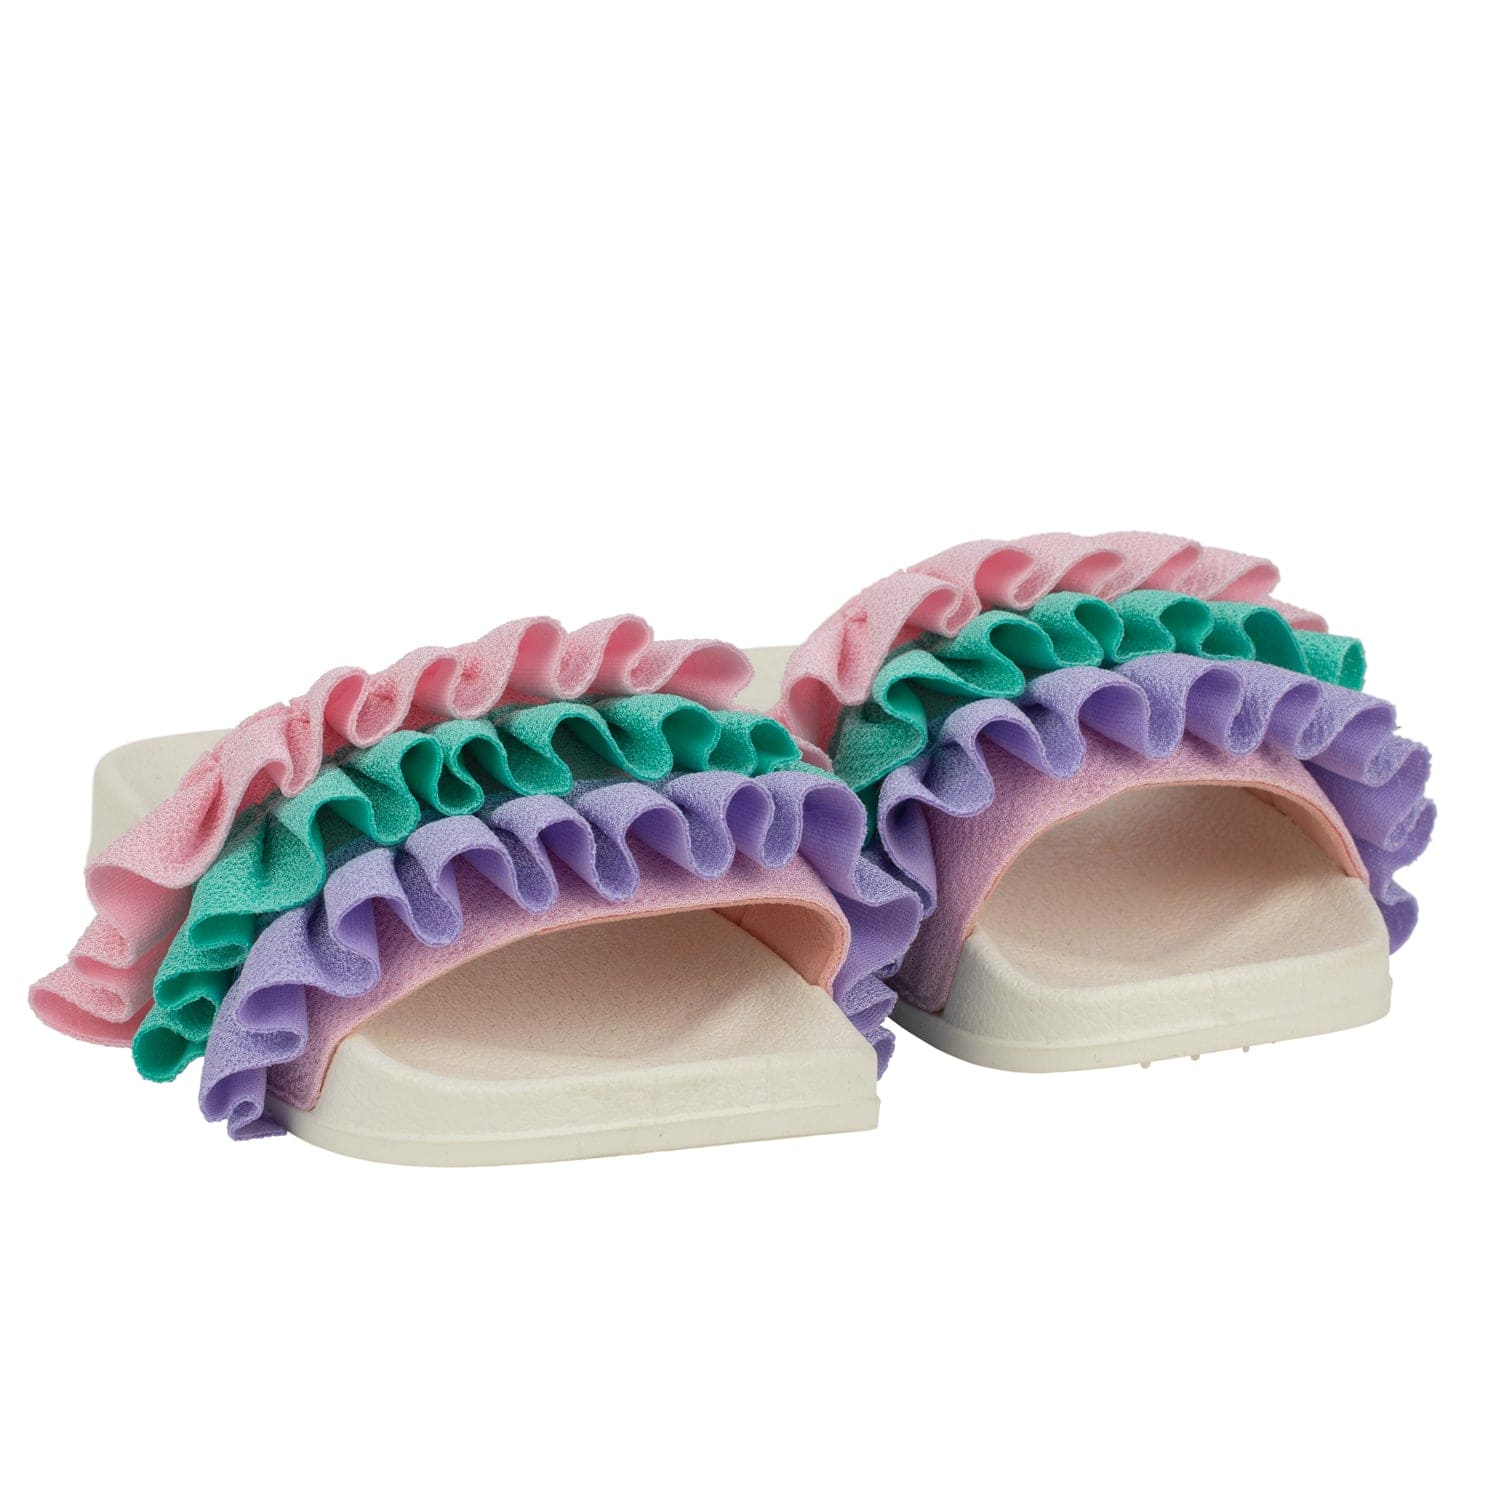 A DEE - Frilly Popping Pastels Frill Sliders - Lilac